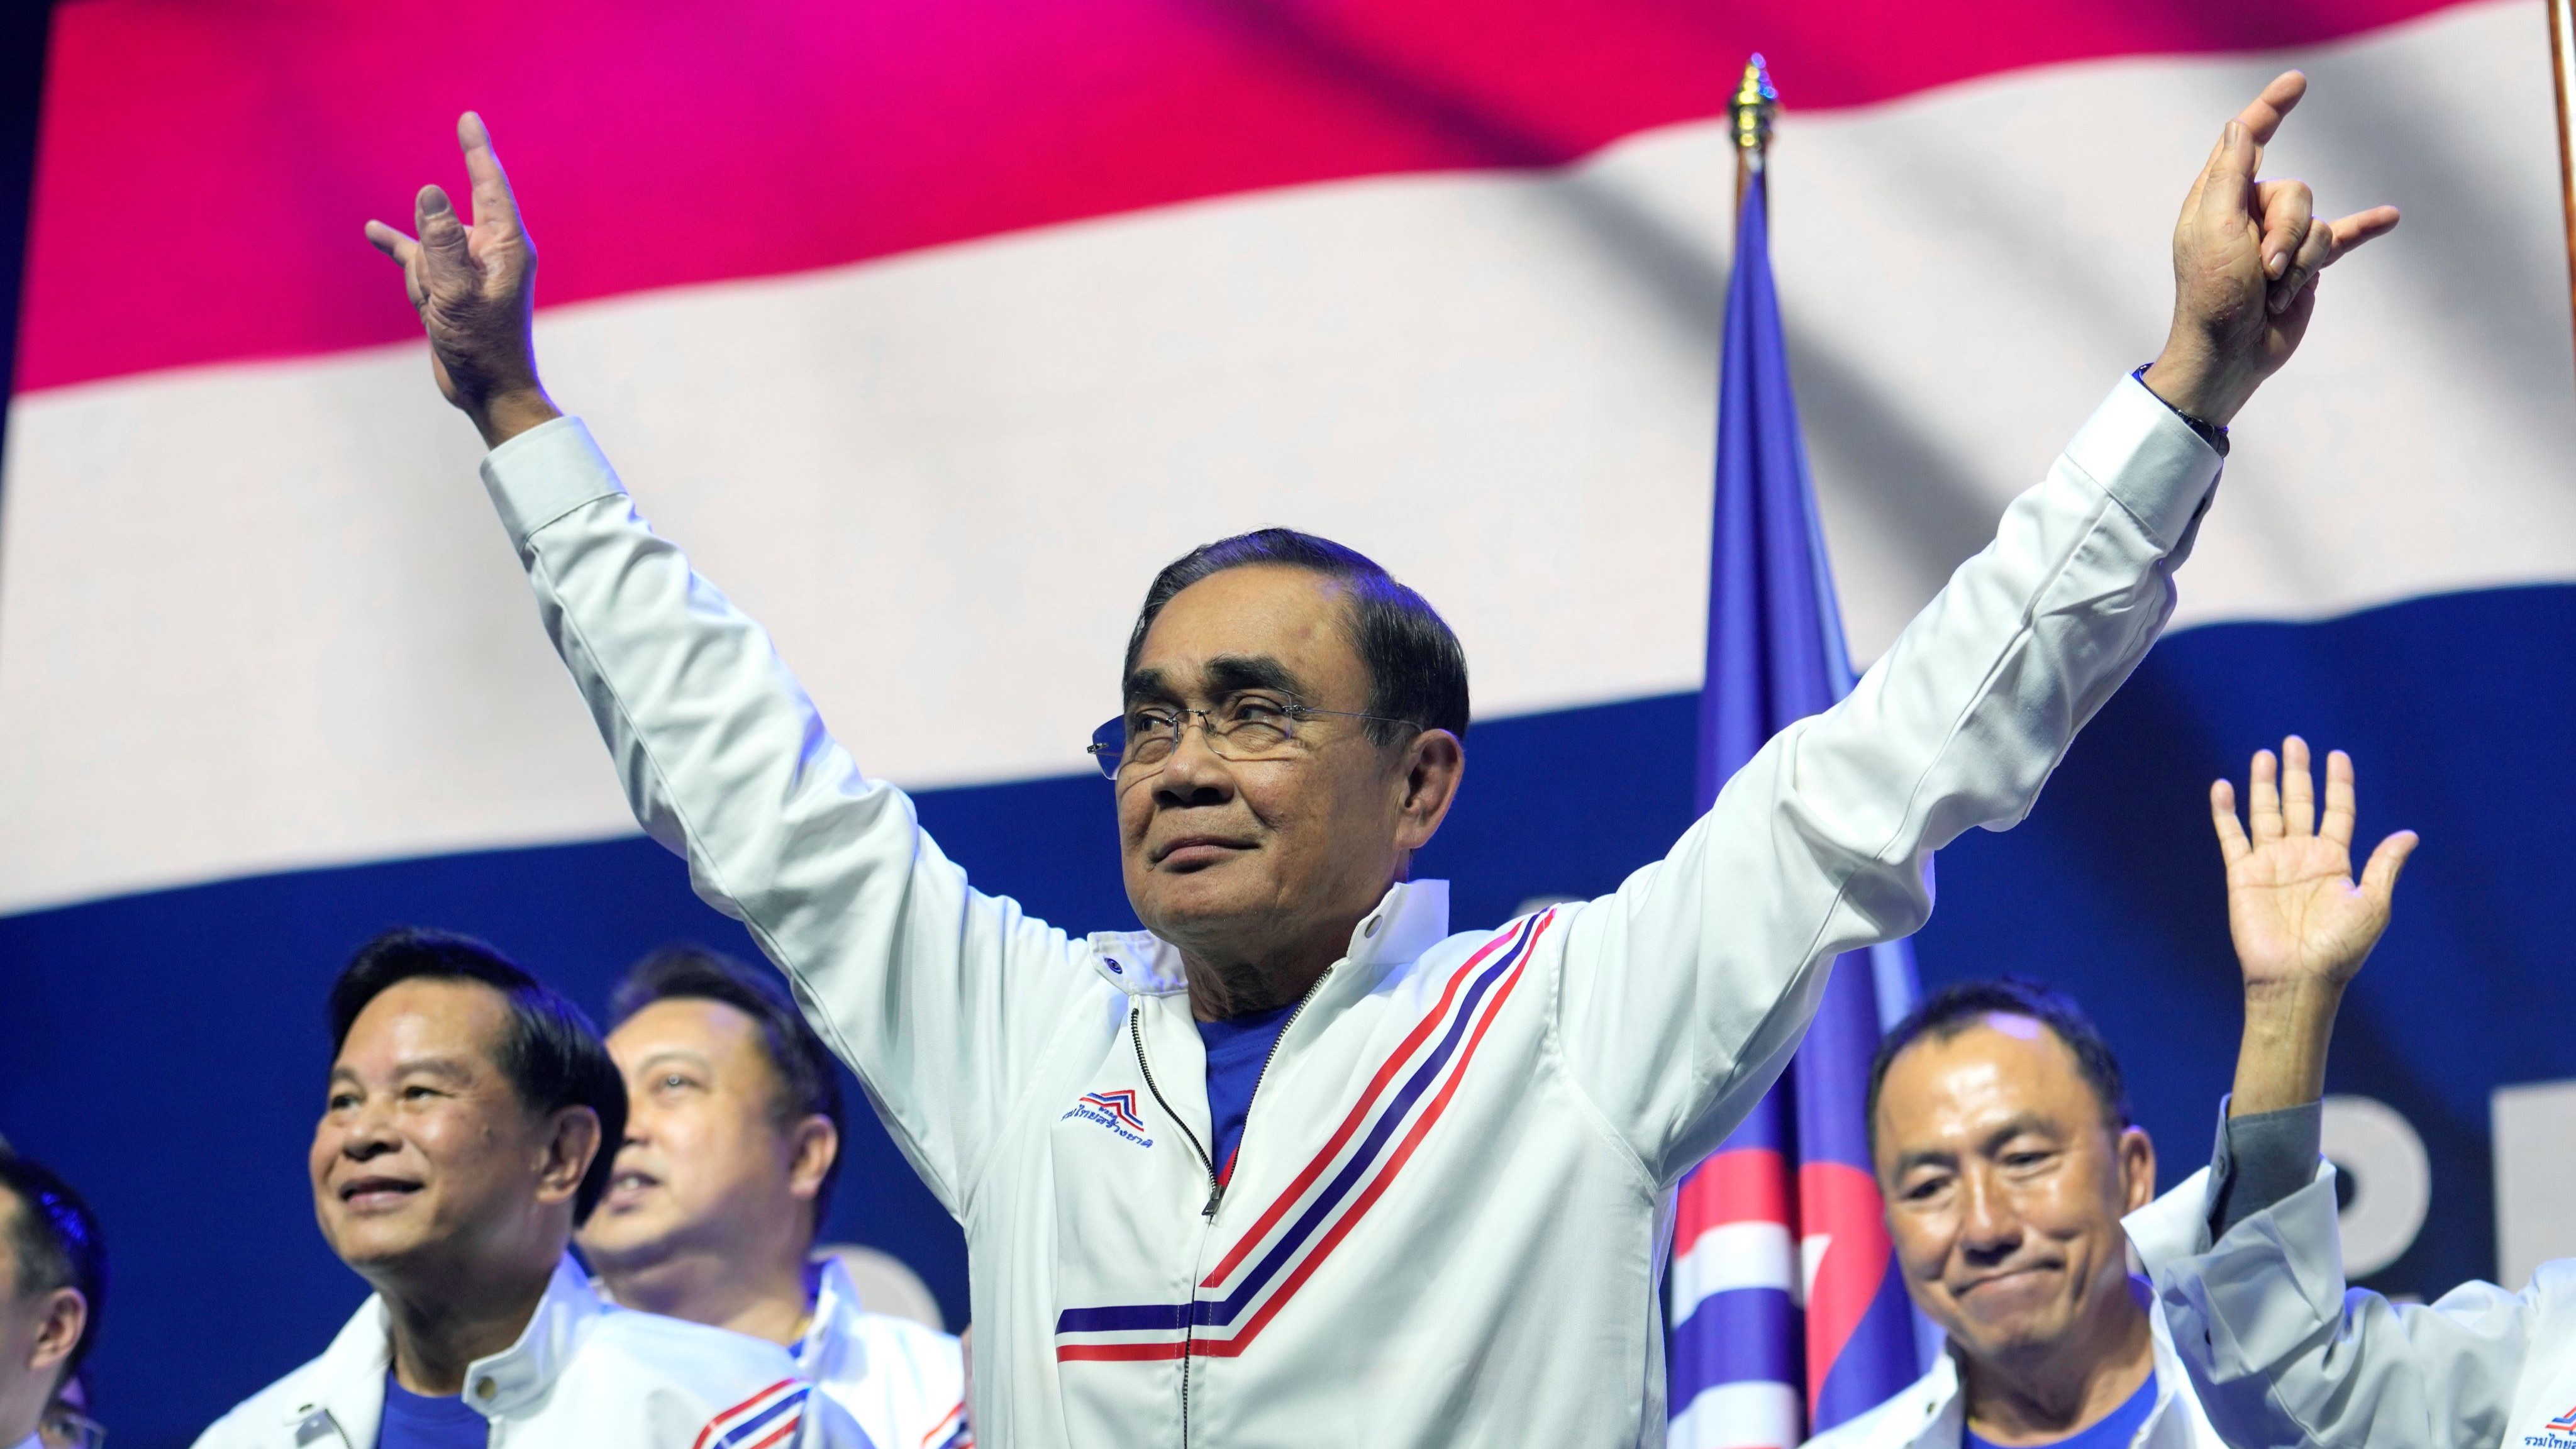 Thailand Elections Unlikely to Stabilize Politics, Democracy WPR